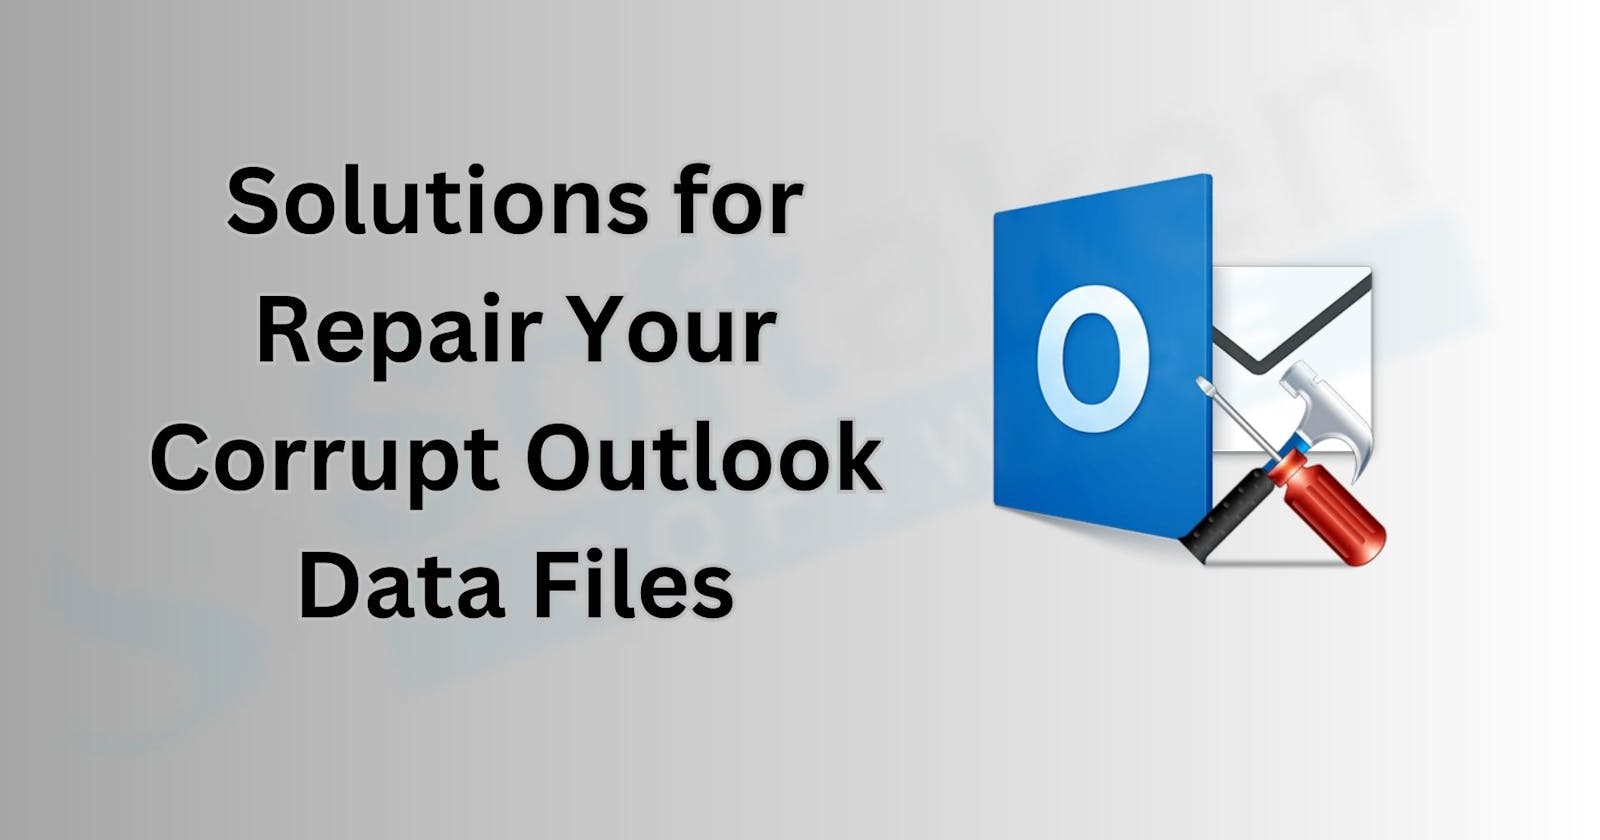 The Complete Solutions for Repair Your Corrupt Outlook Data Files